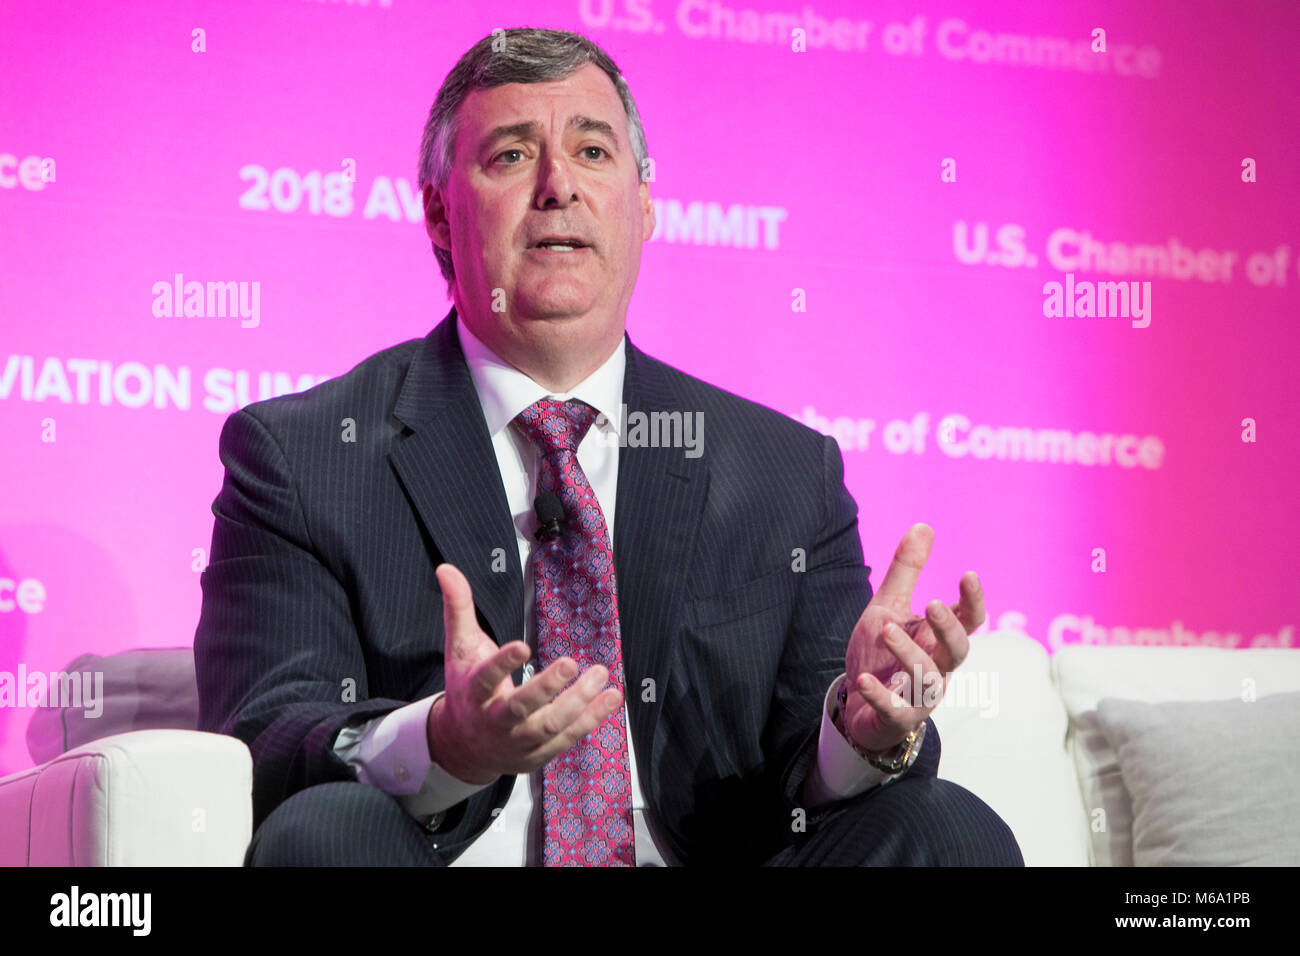 Washington, USA. 1st Mar, 2018. Kevin McAllister, President and Chief Executive Officer, Boeing Commercial Airplanes, speaks at the U.S. Chamber of Commerce 17th Annual Aviation Summit in Washington, D.C. on March 1, 2018. Credit: Kristoffer Tripplaar/Alamy Live News Stock Photo